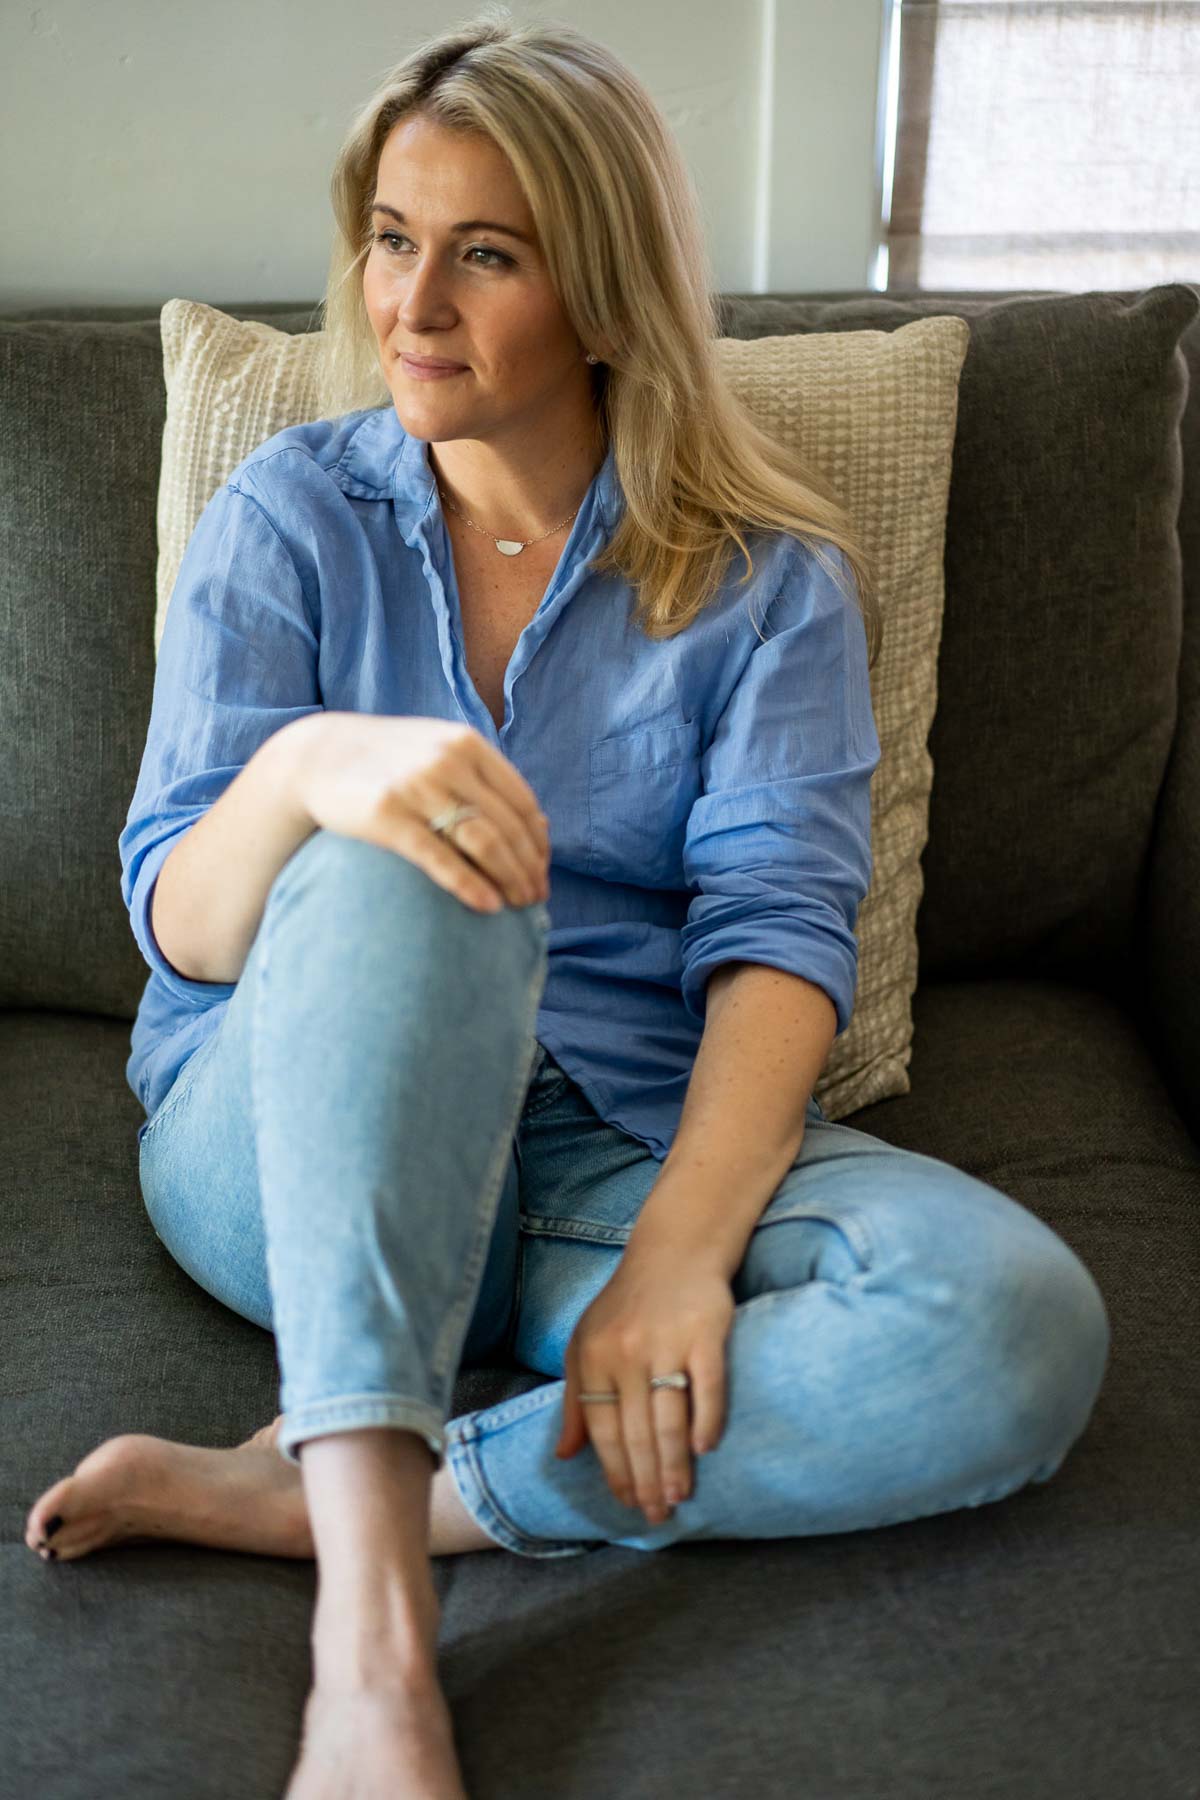 Luci Wearing Blue Linen Shirt and Jeans on Couch